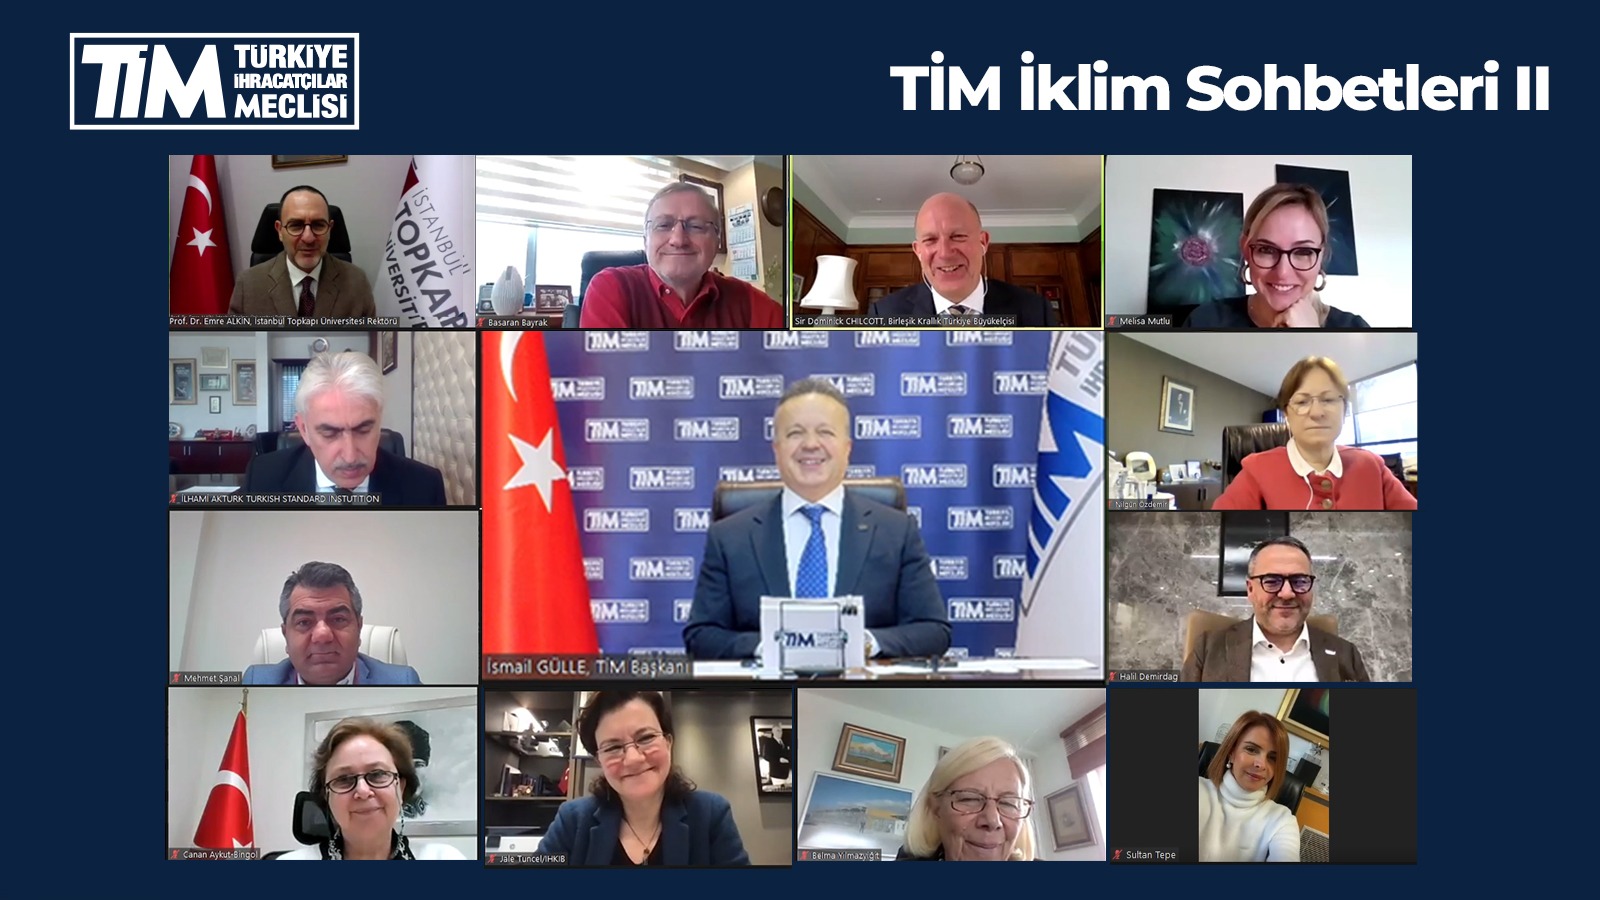 The UK Ambassador to Türkiye Is the Guest at the TİM Climate Talks